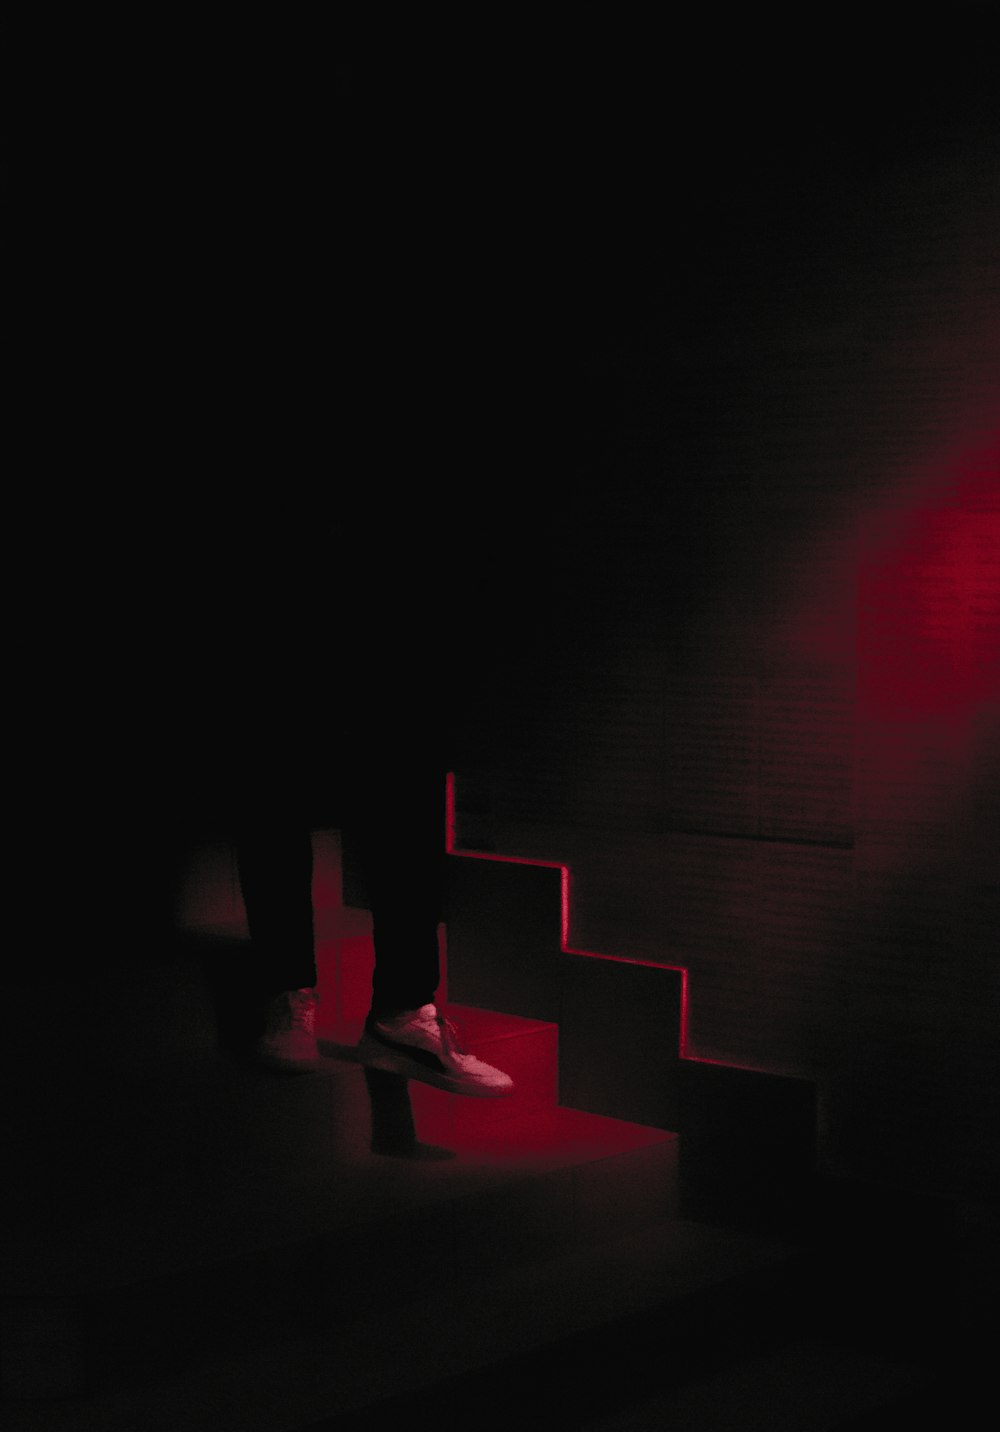 red and black stairs with red lights